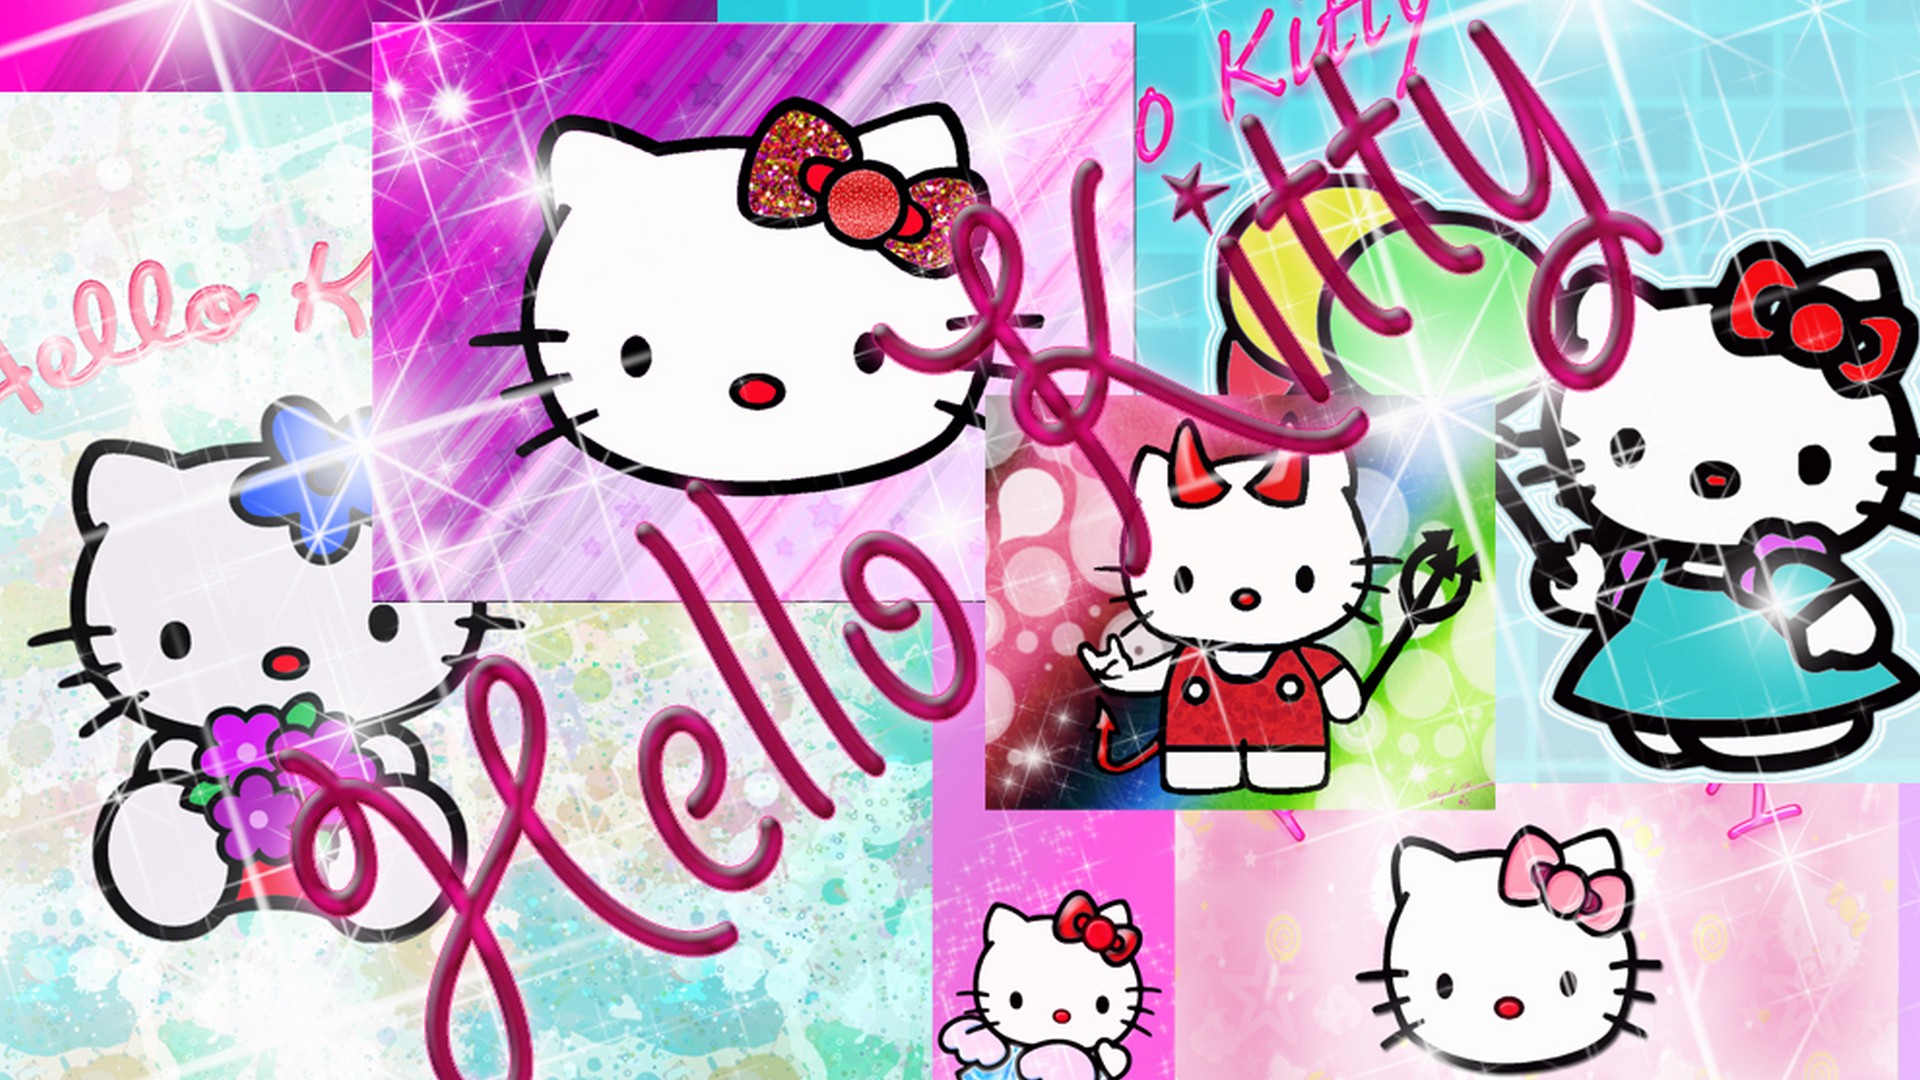 Sanrio Hello Kitty Desktop Backgrounds With Resolution 1920X1080 pixel. You can make this wallpaper for your Desktop Computer Backgrounds, Mac Wallpapers, Android Lock screen or iPhone Screensavers